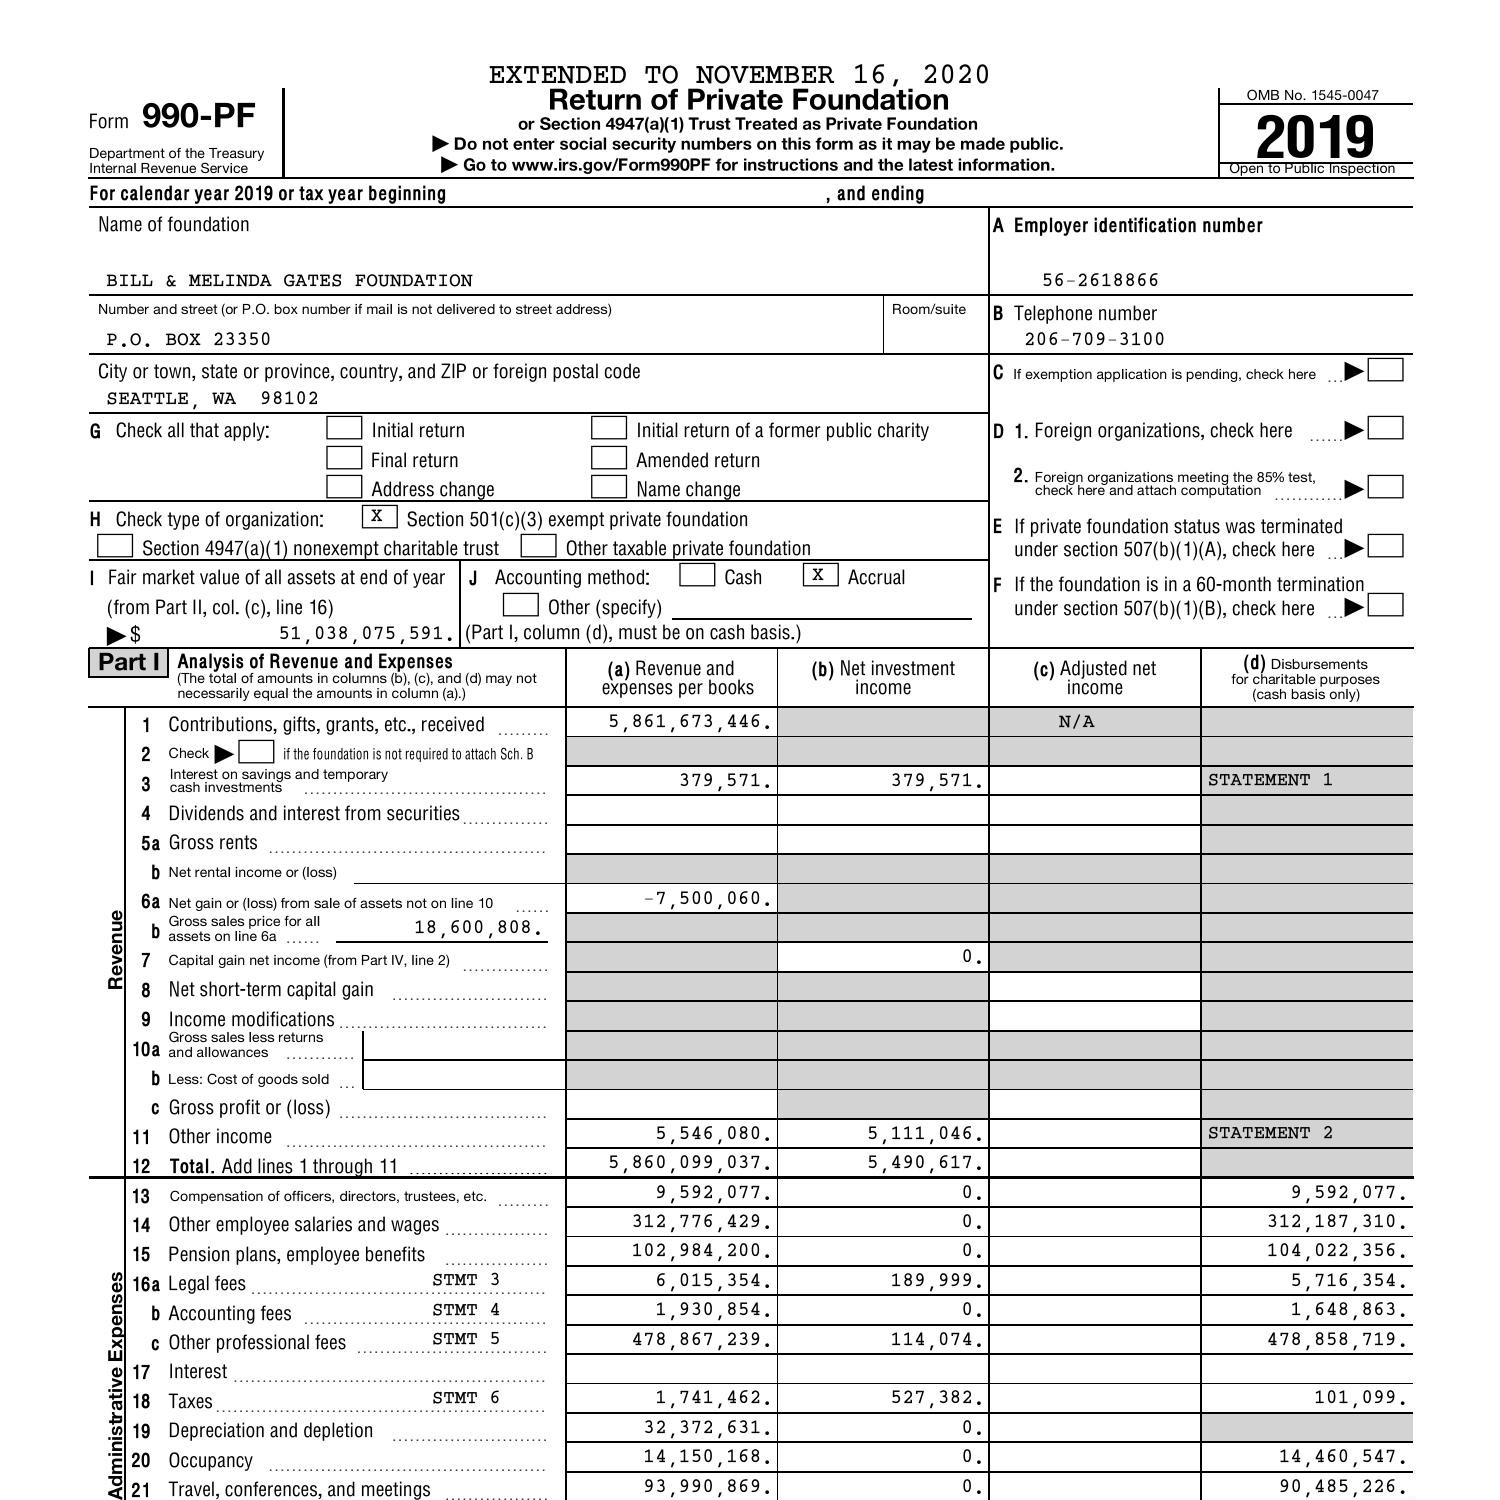 form-990-preparation-service-501-c-3-tax-services-in-tampa